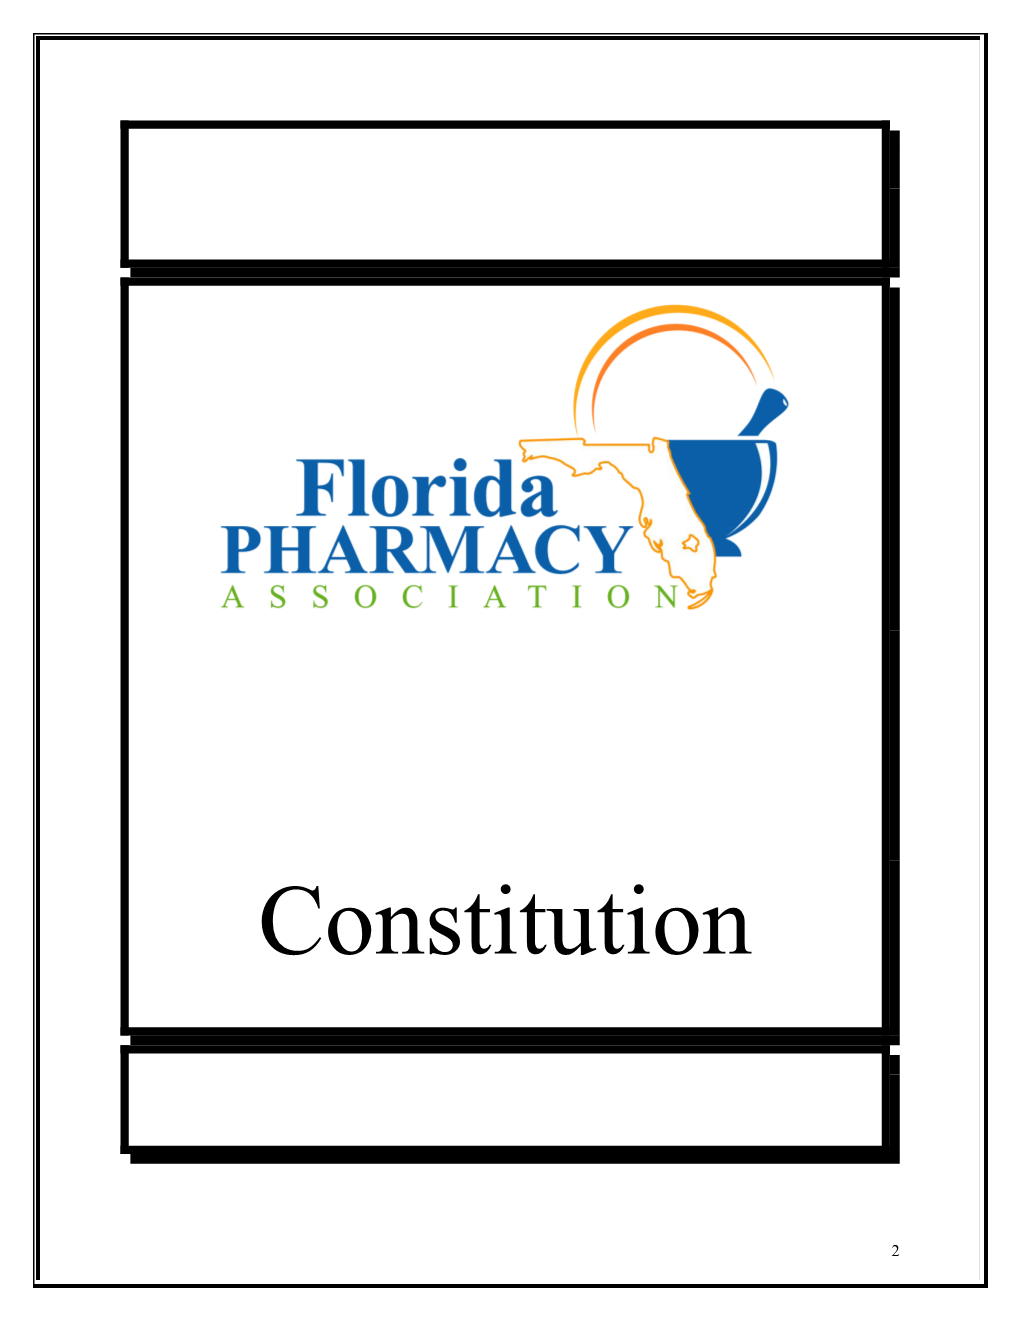 The Association Shall Be Called the Florida Pharmacy Association, Hereinafter Called The